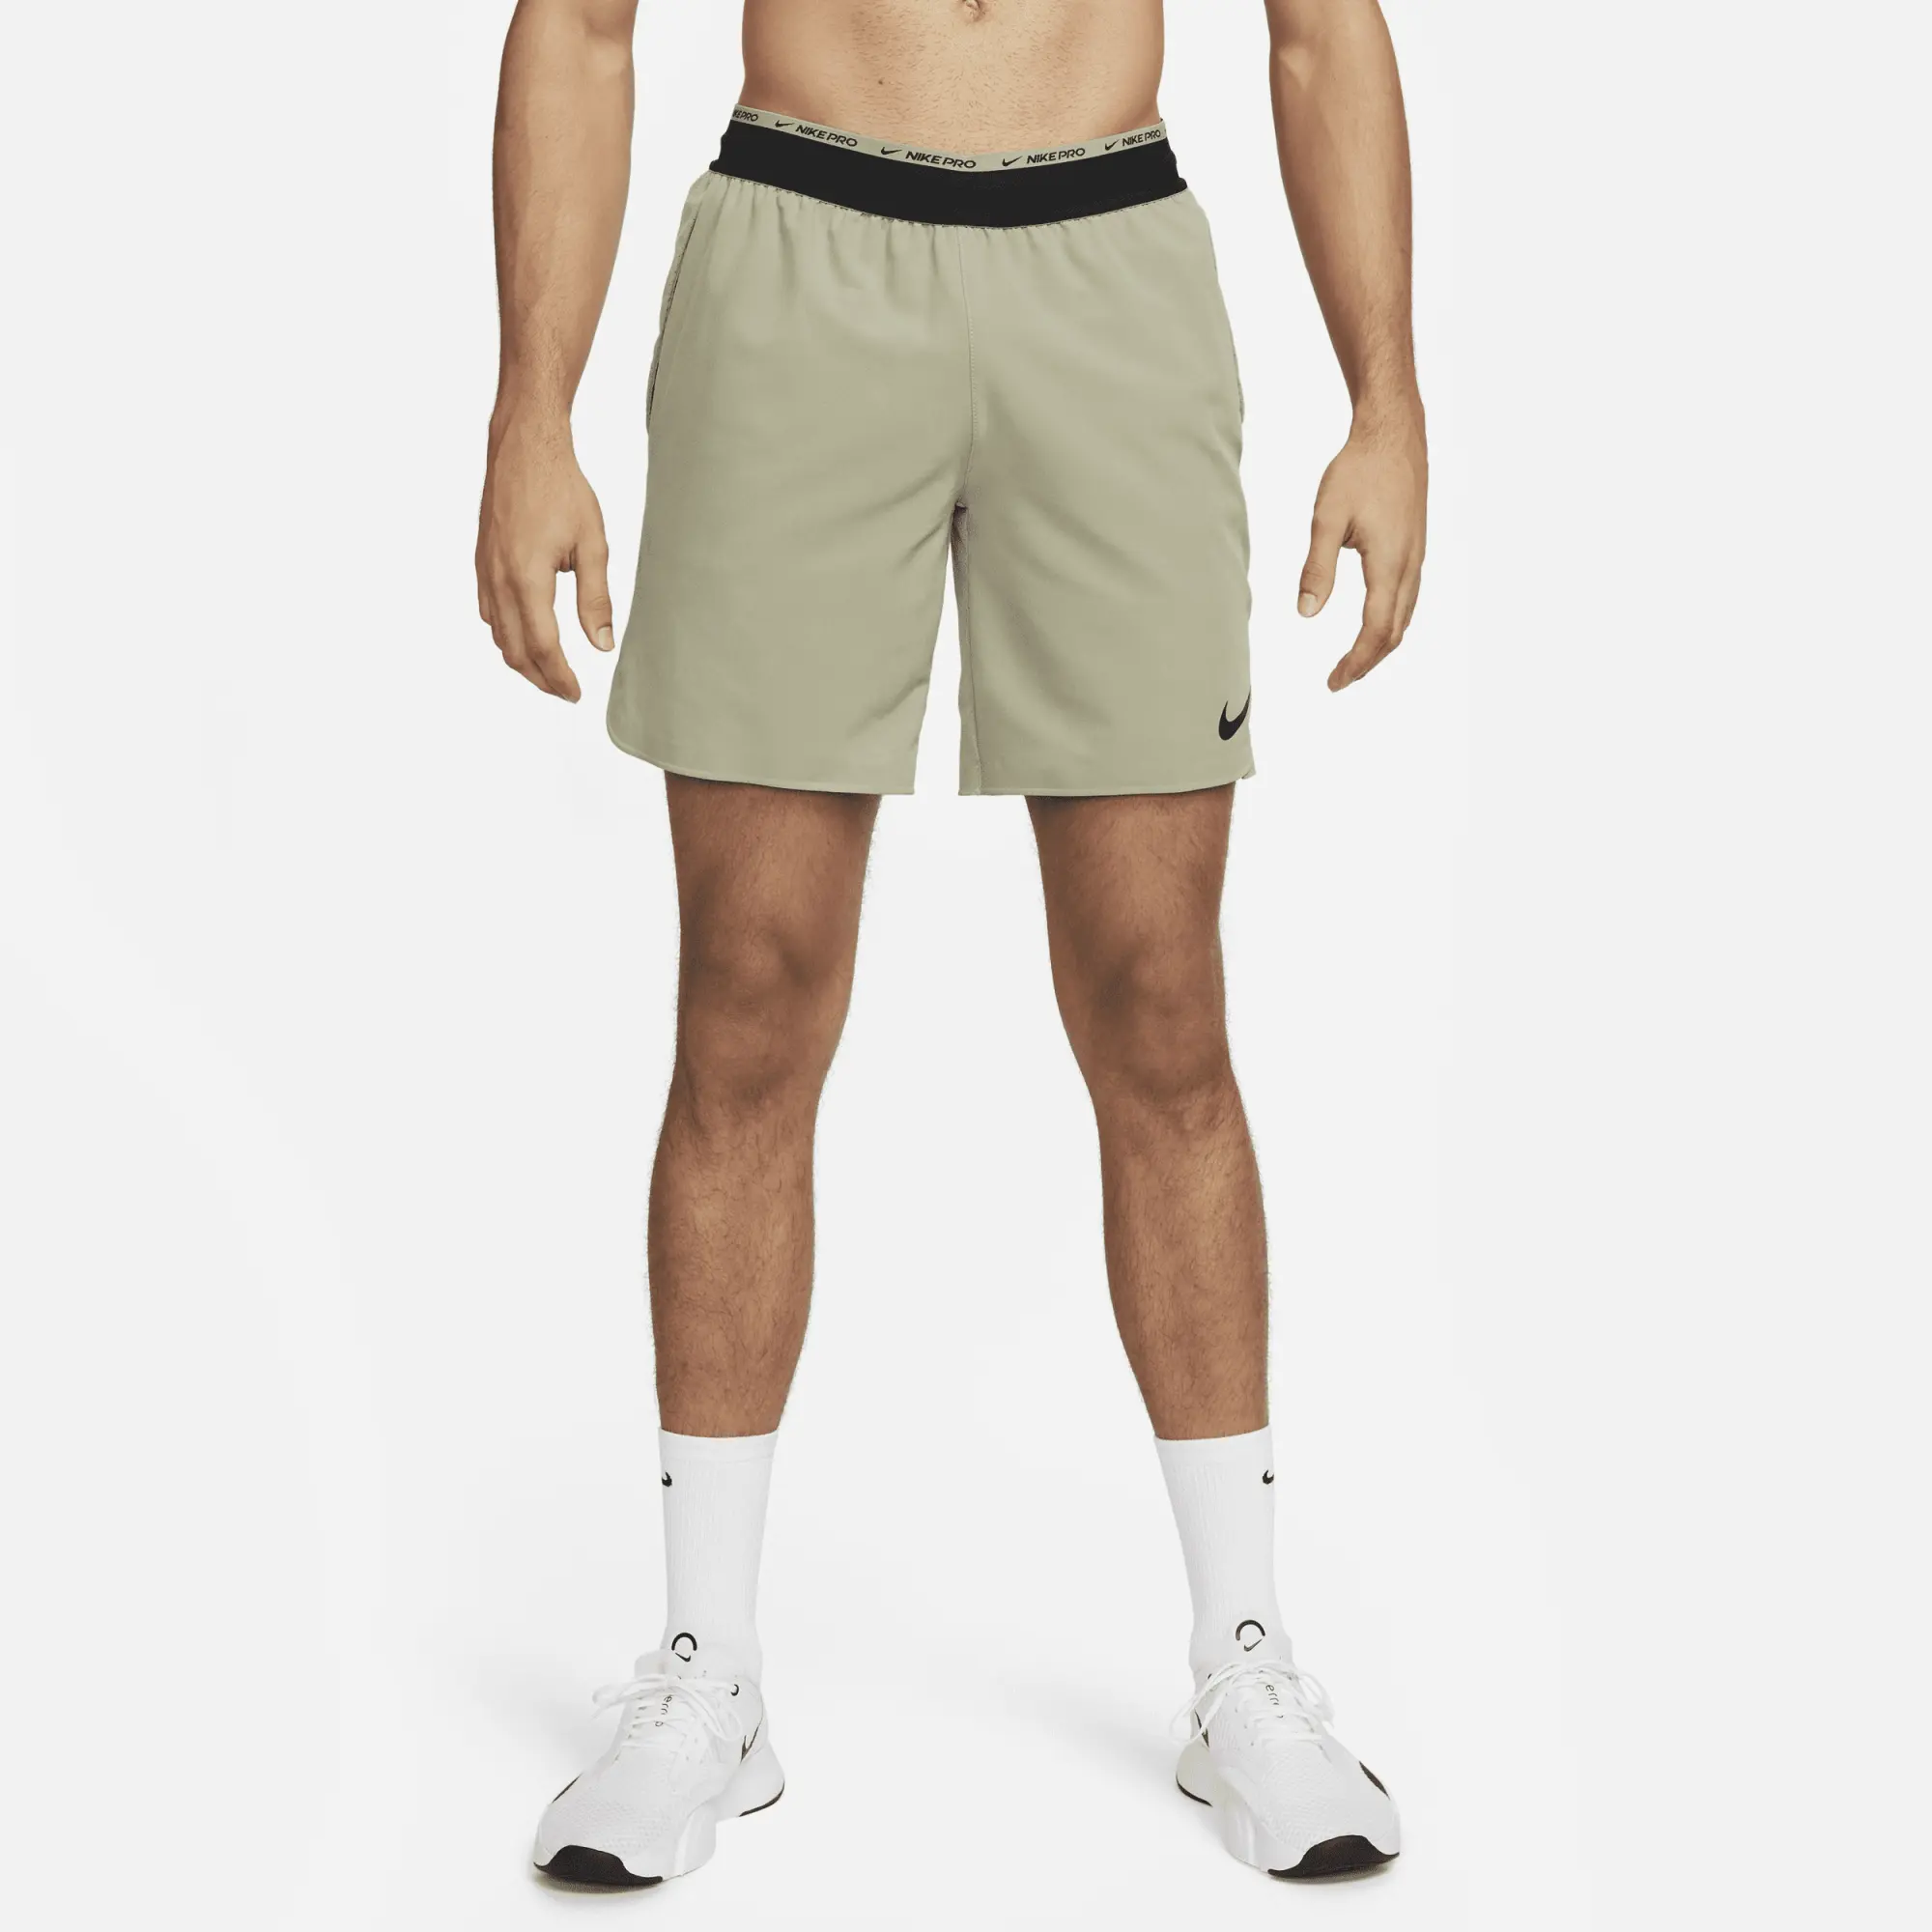 Nike Dri-FIT Flex Rep Pro Collection Men's 20cm (approx.) Unlined Training  Shorts - Brown, DD1700-276